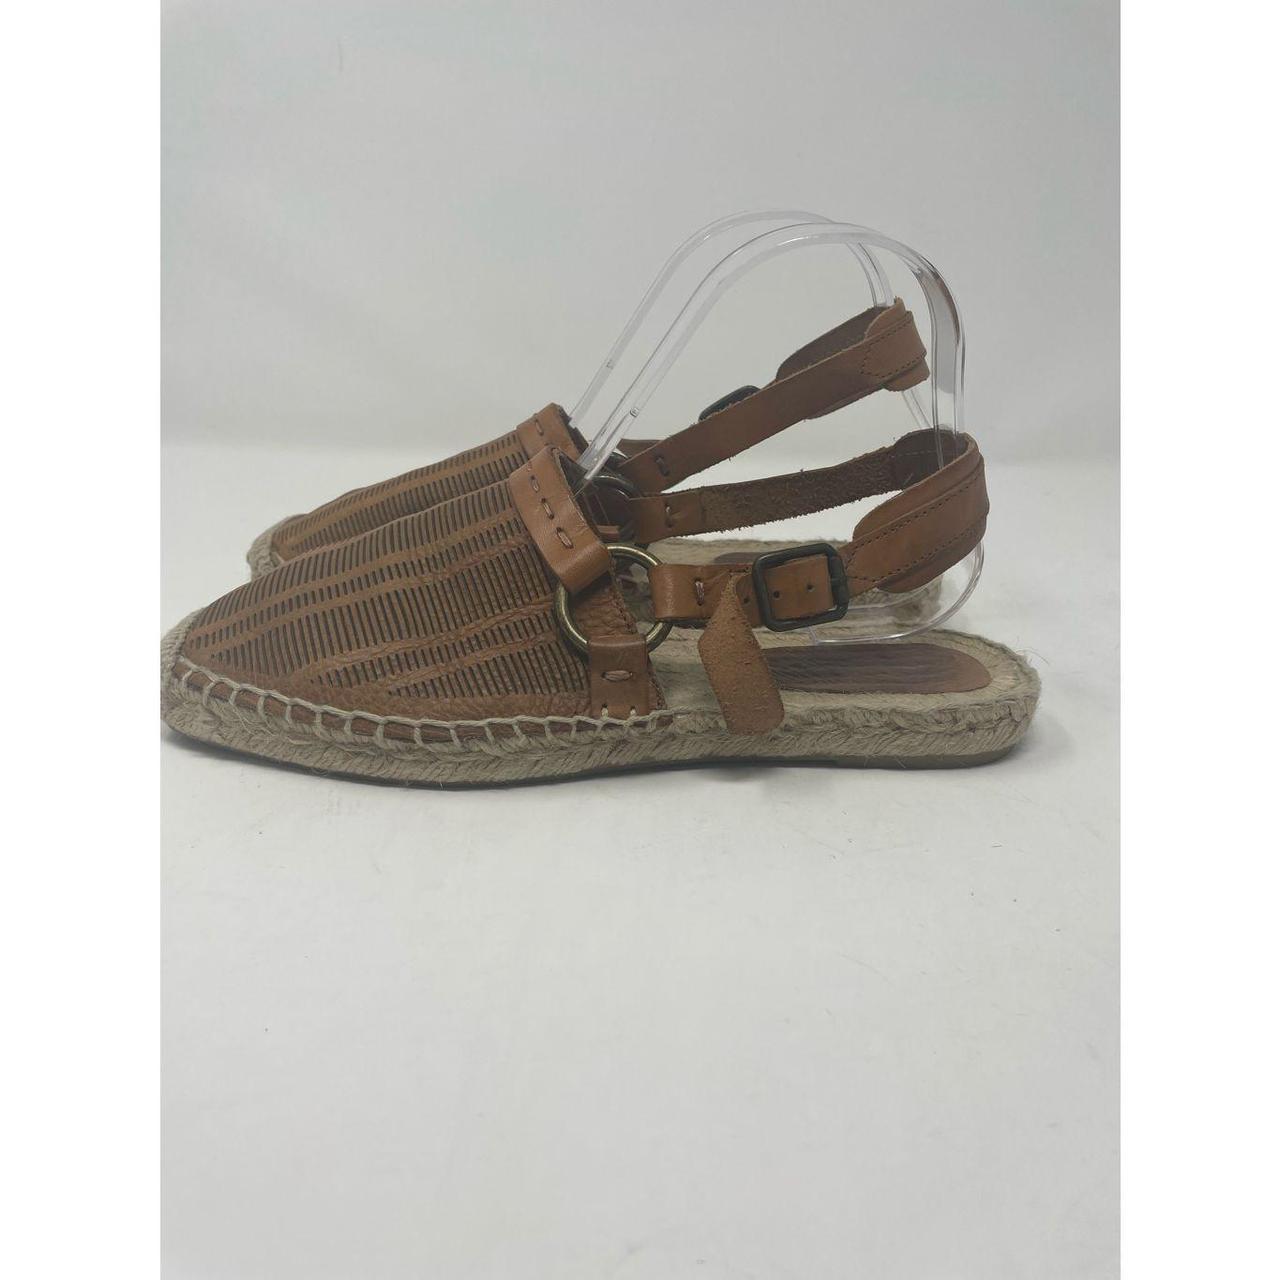 Product Image 4 - Effortless slip-on espadrilles featuring a